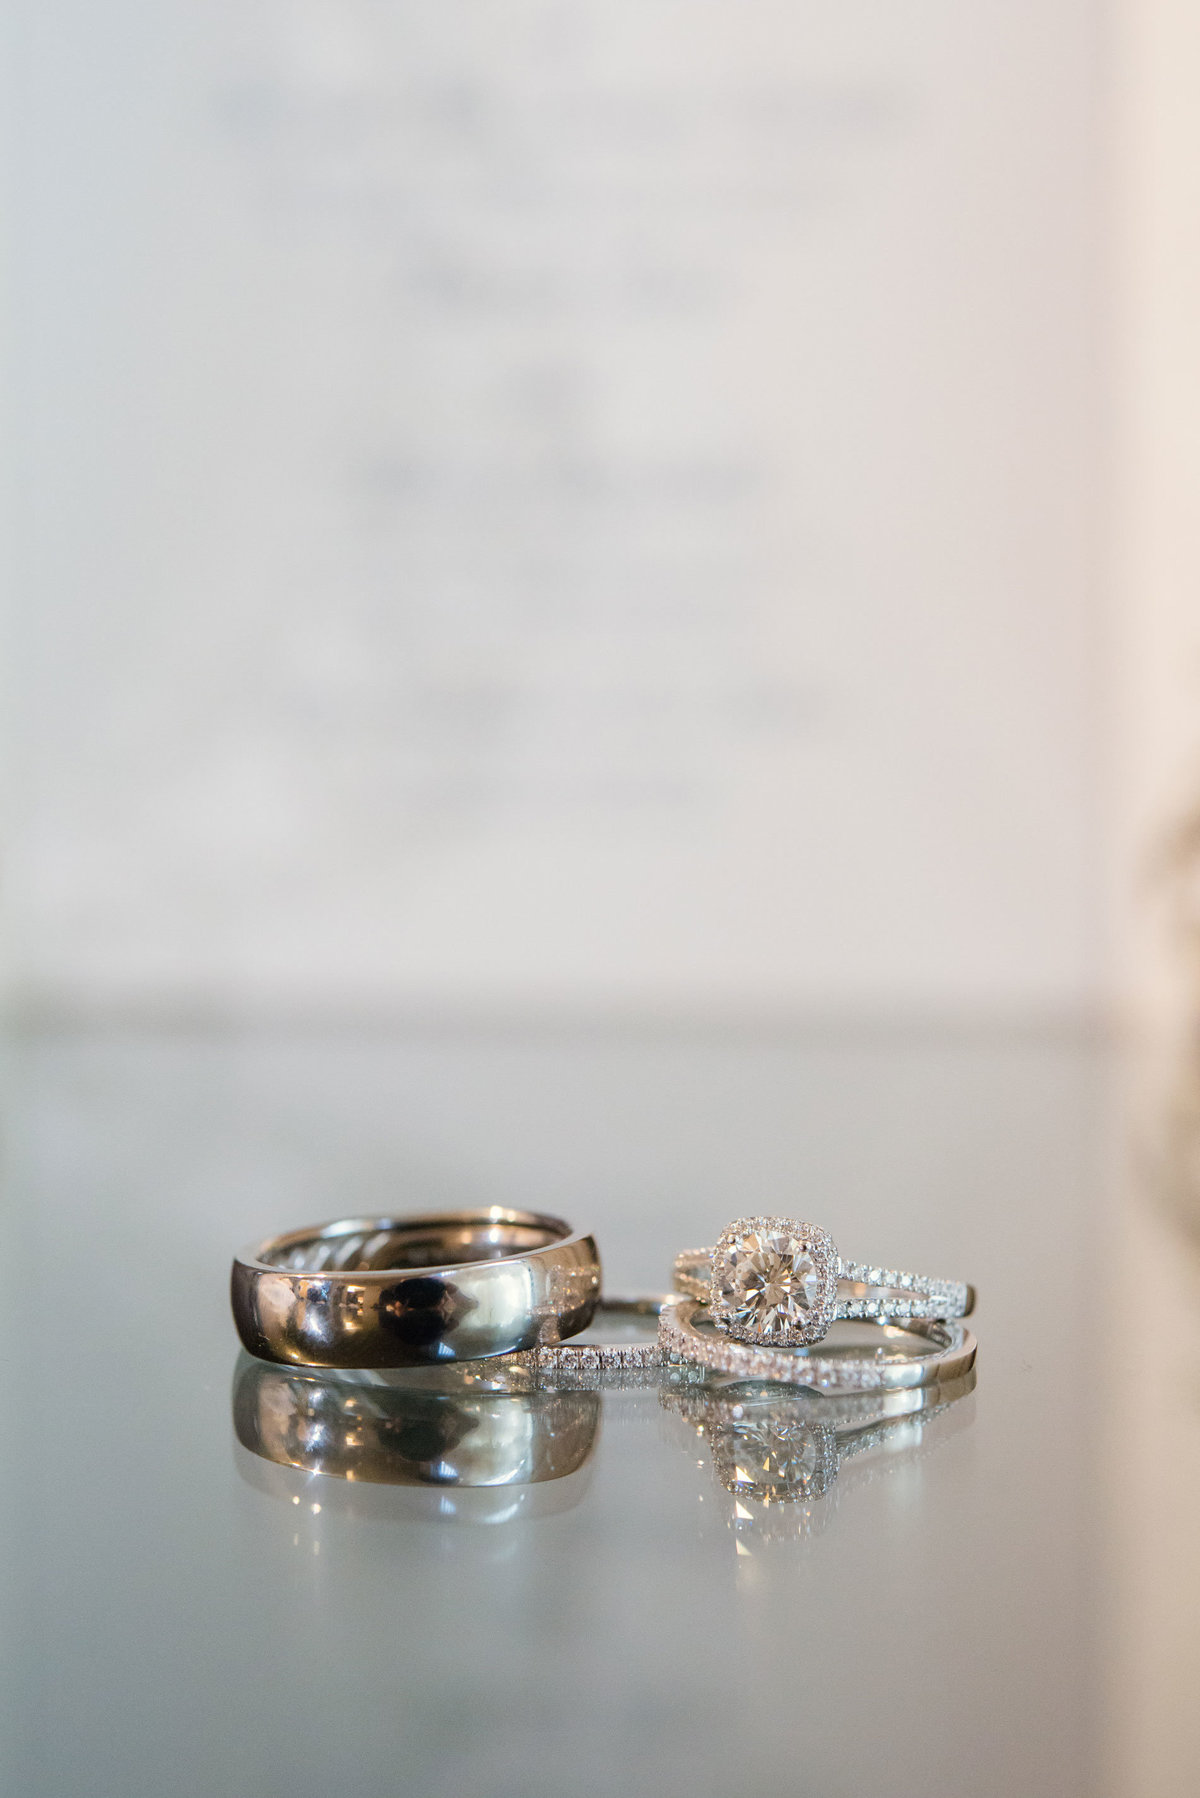 Wedding bands and engagement ring at The Inn at Fox Hollow